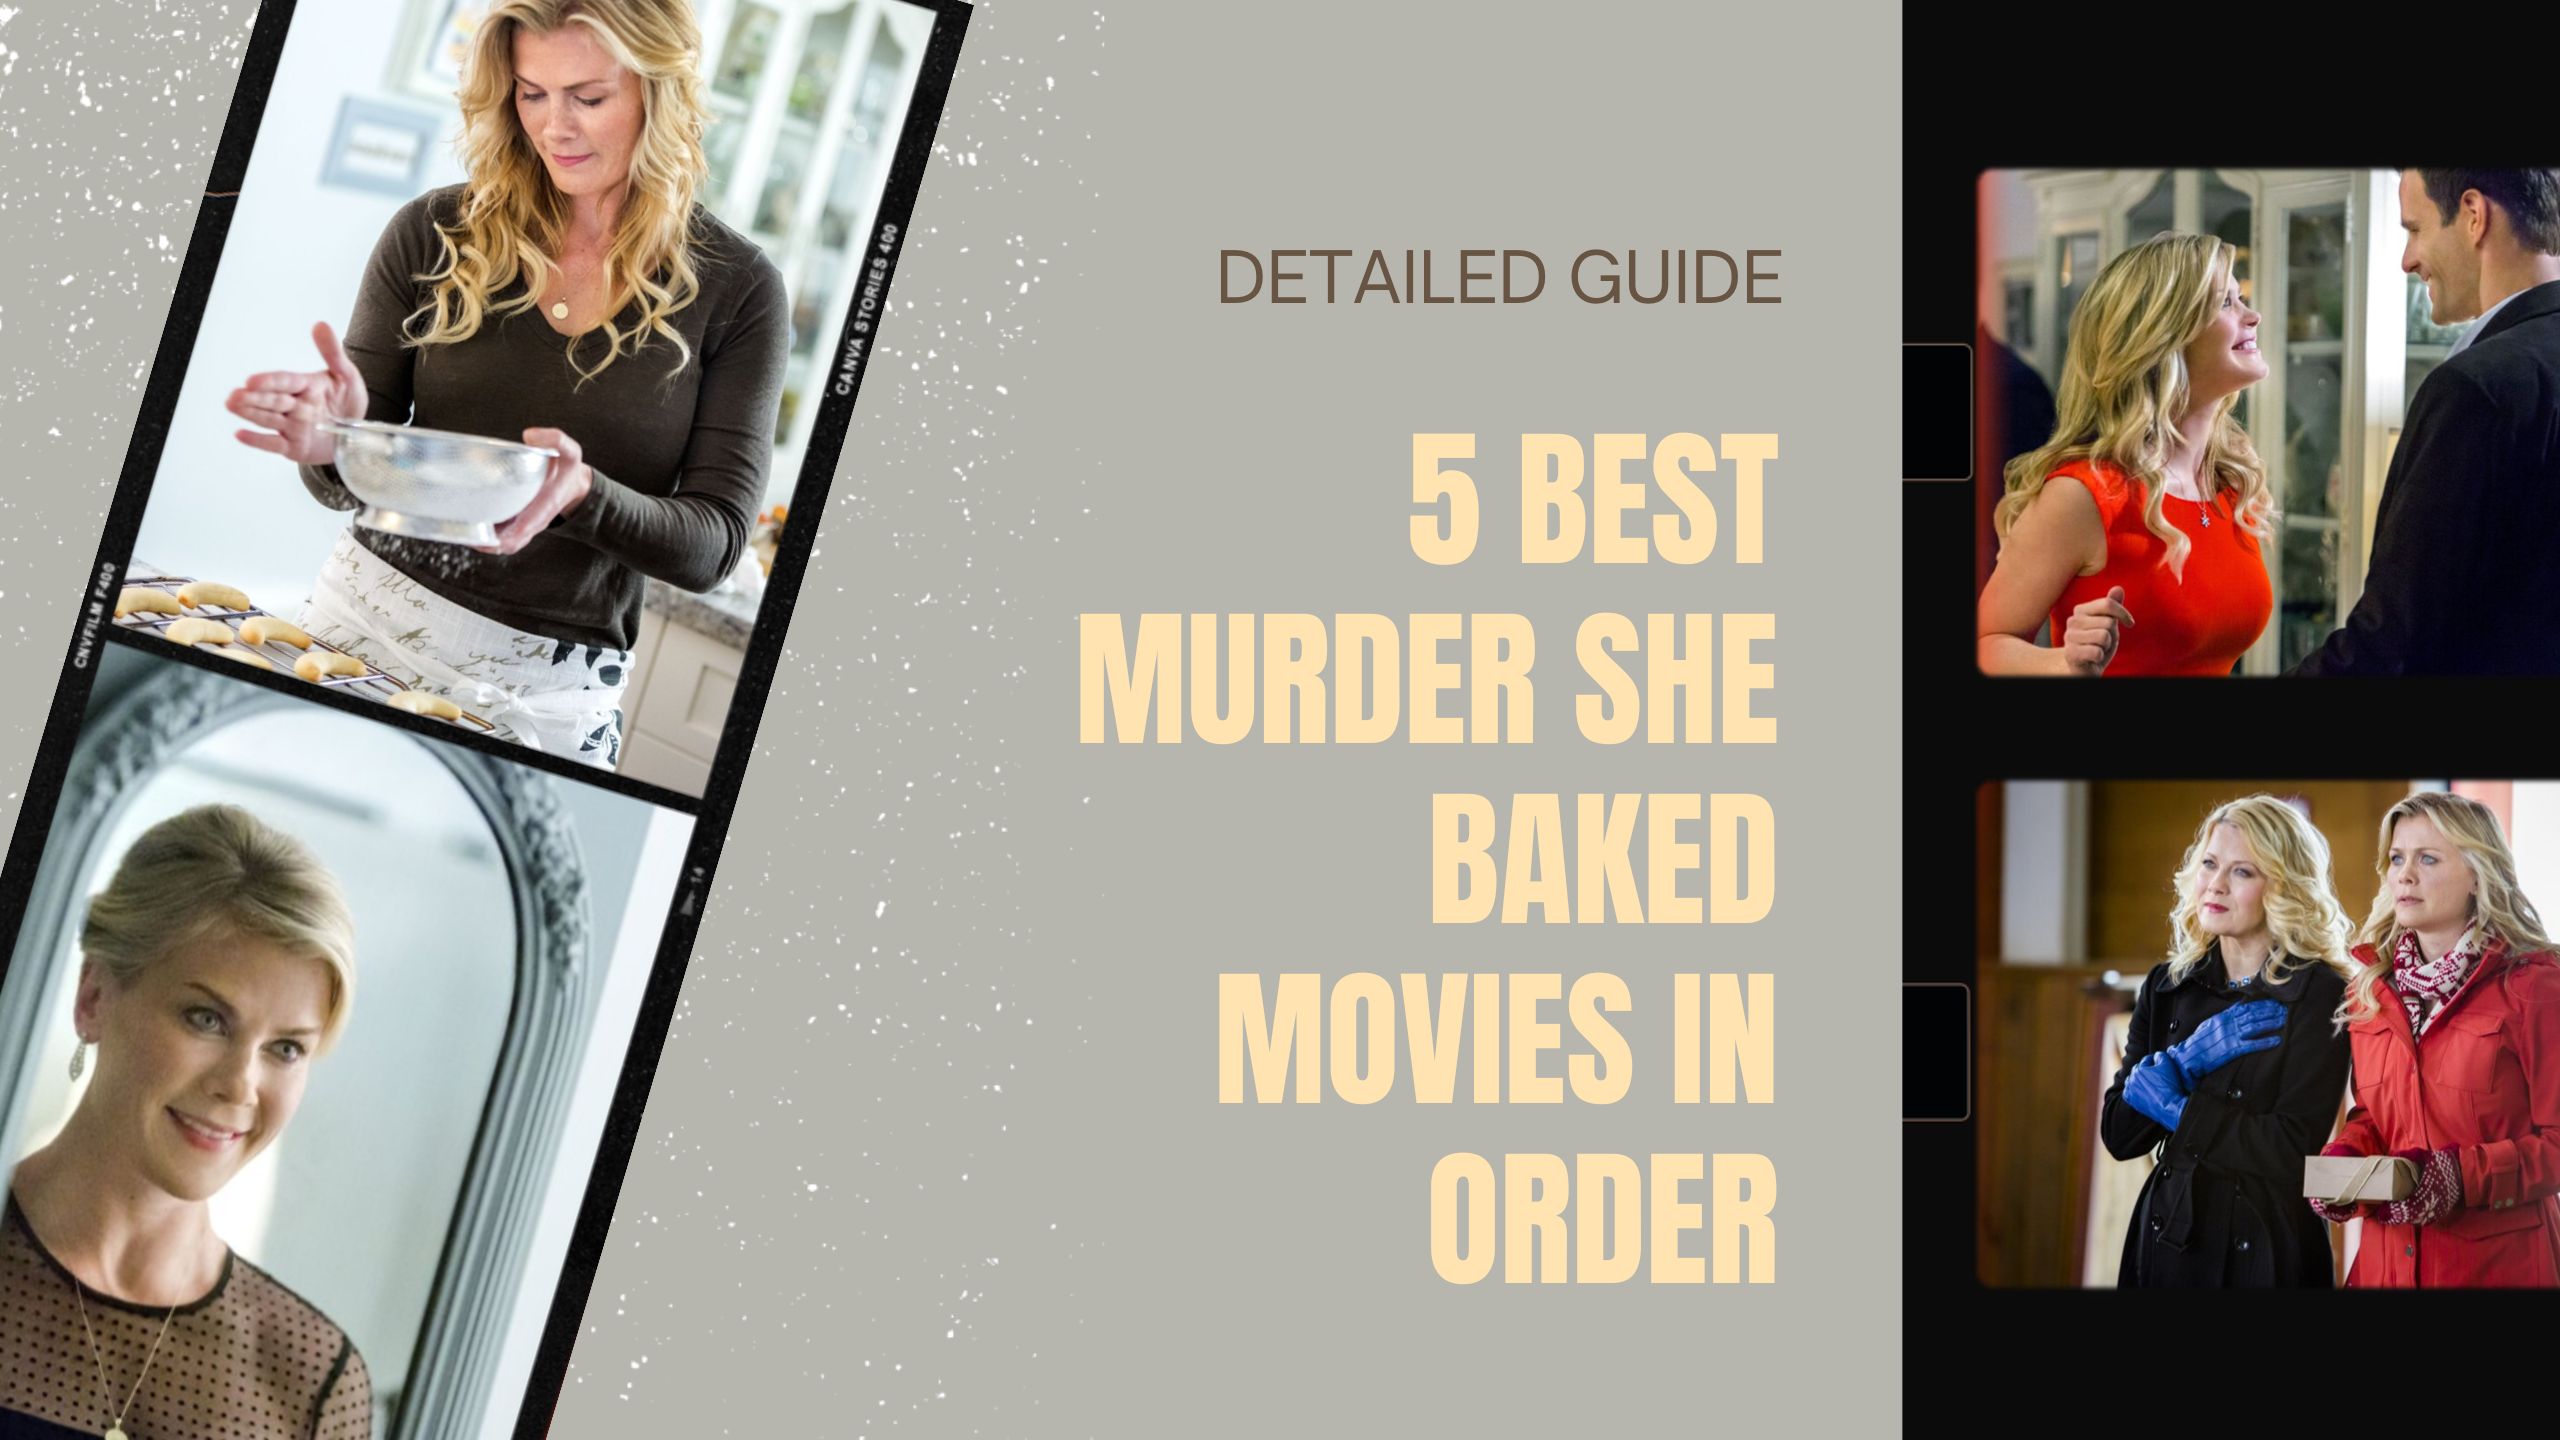 5 Best Murder She Baked Movies in Order - Detailed Guide